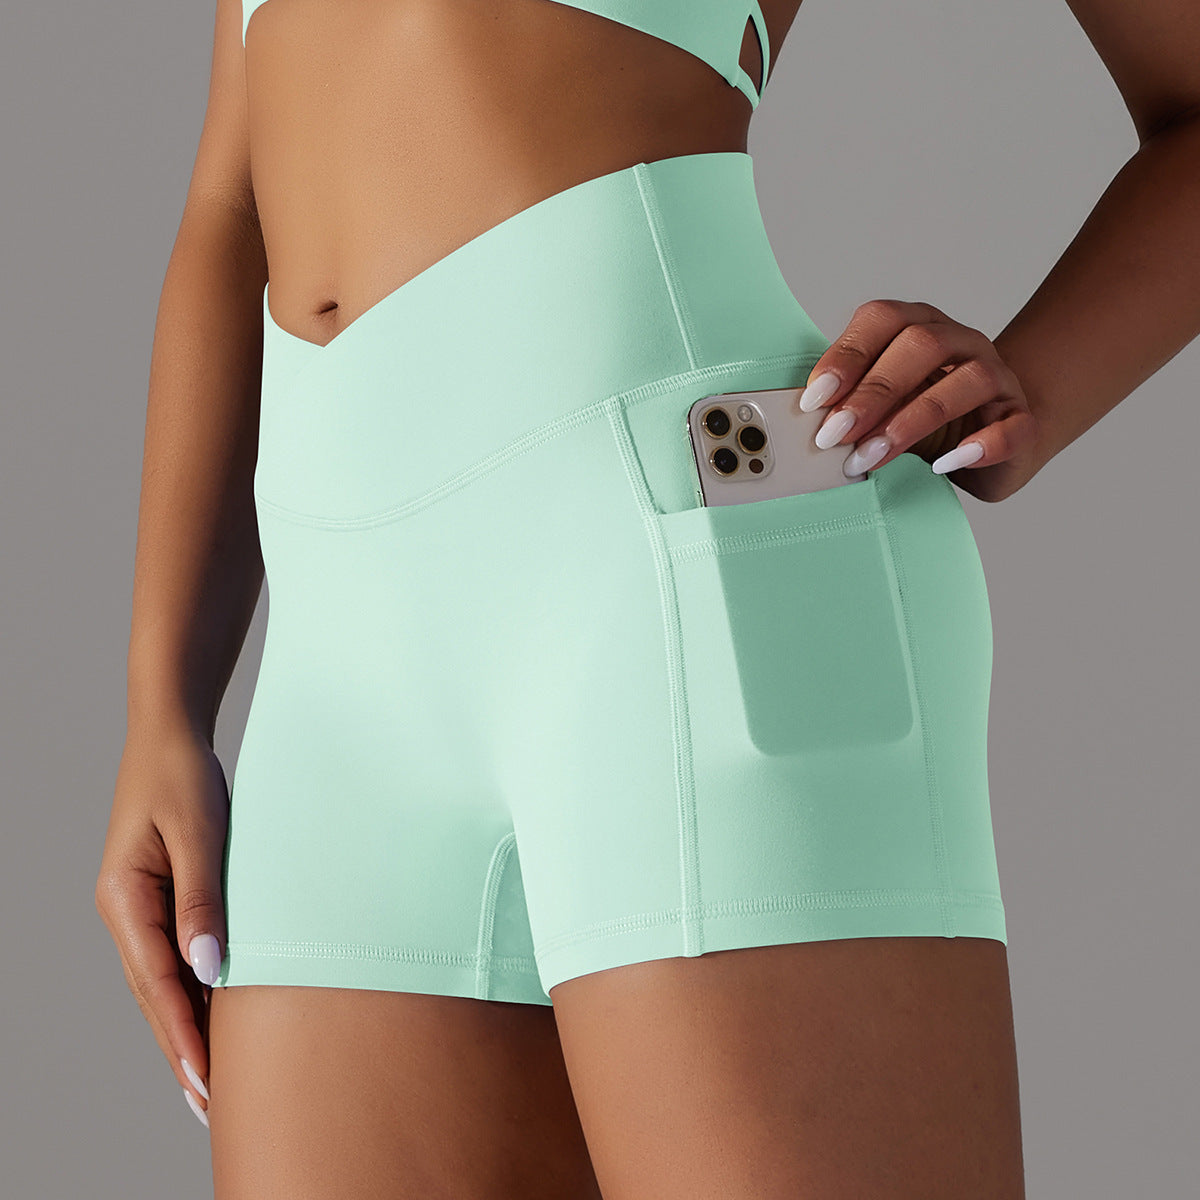 Women's Workout Shorts with Phone Pocket